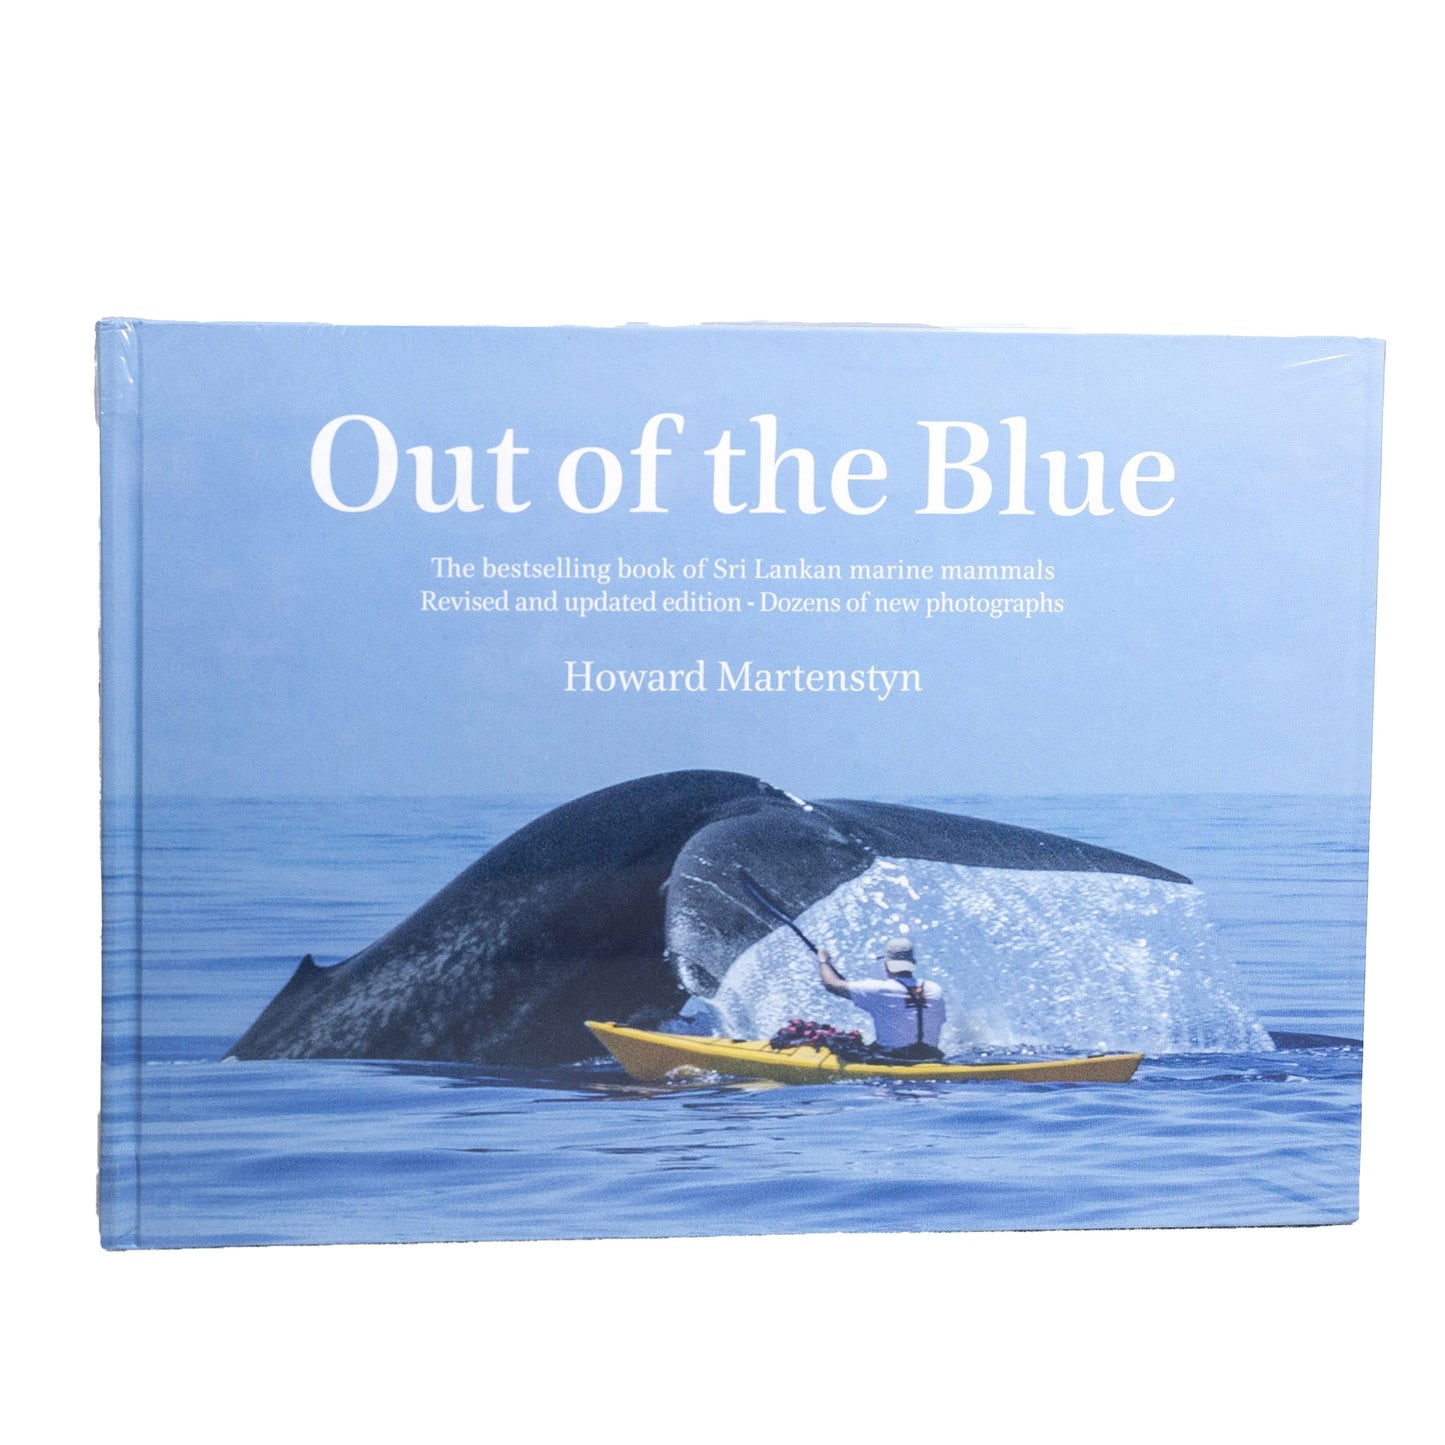 Out of the Blue by Howard Martenstyn